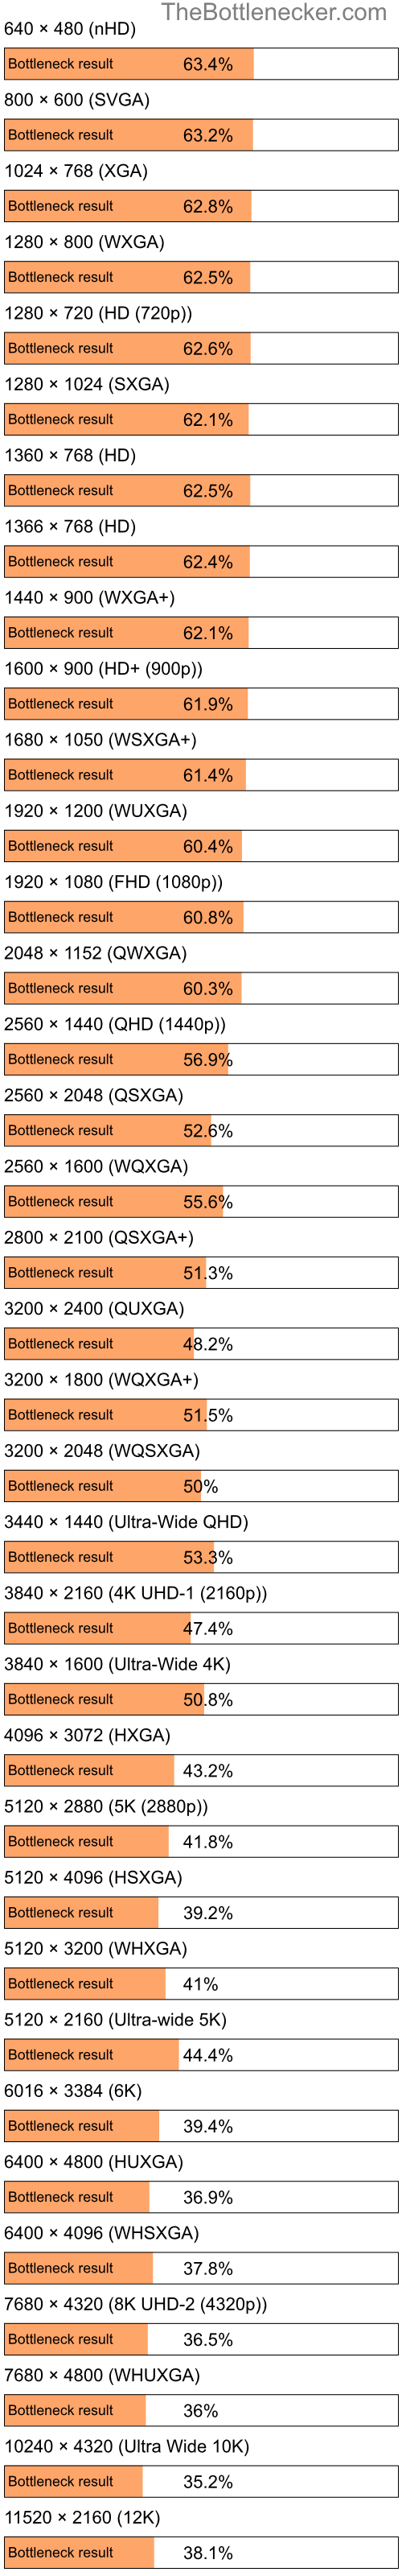 Bottleneck results by resolution for AMD Ryzen 5 2600 and NVIDIA GeForce RTX 4070 Ti in Processor Intense Tasks